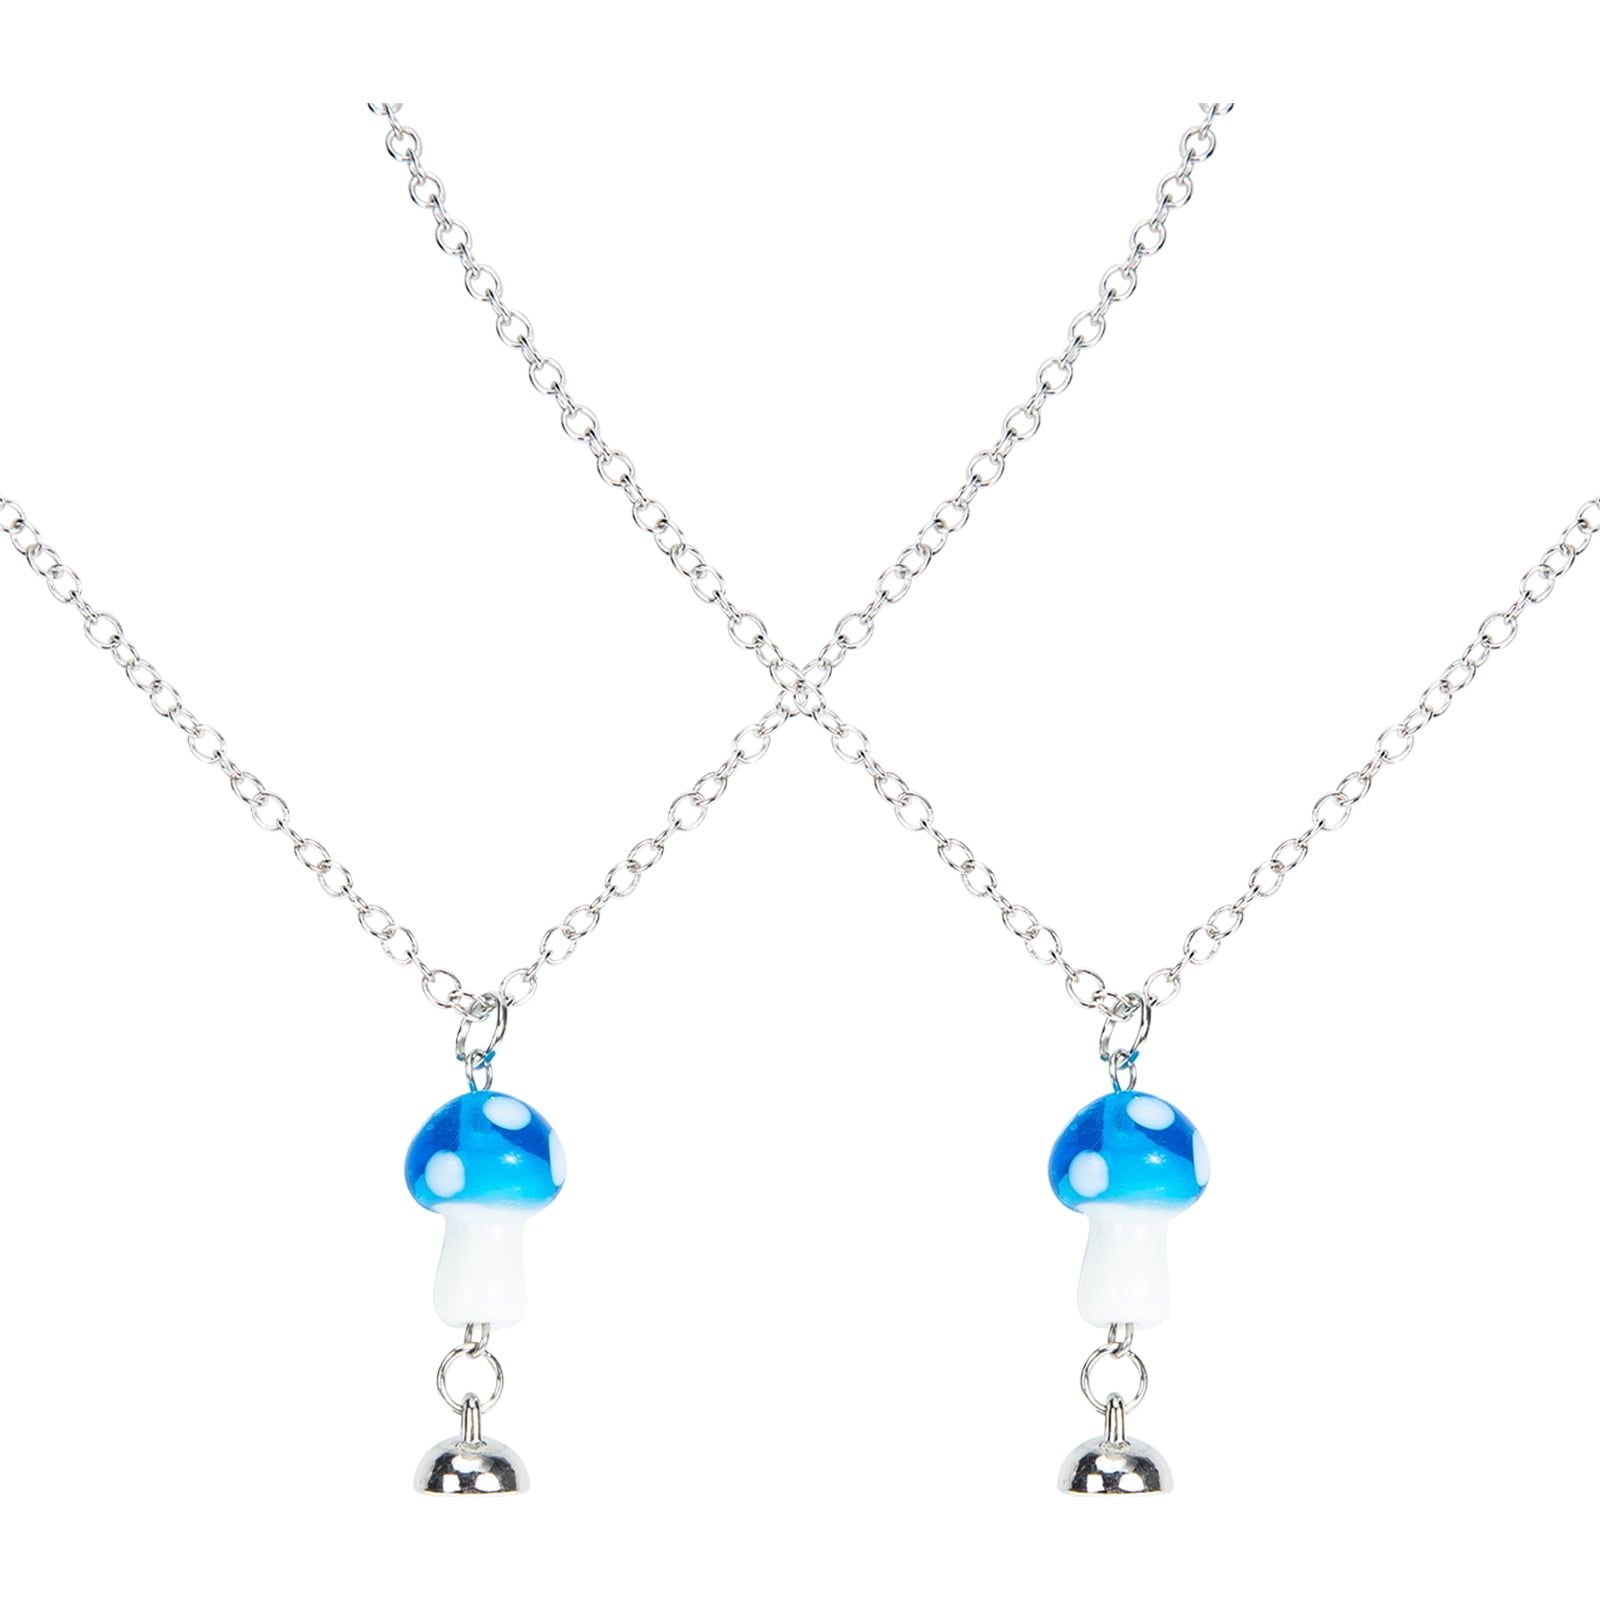 Necklace Mushroom Necklaces Moon Friendship Magnetic Matching Pendant Relationship  Couple Jewelry 